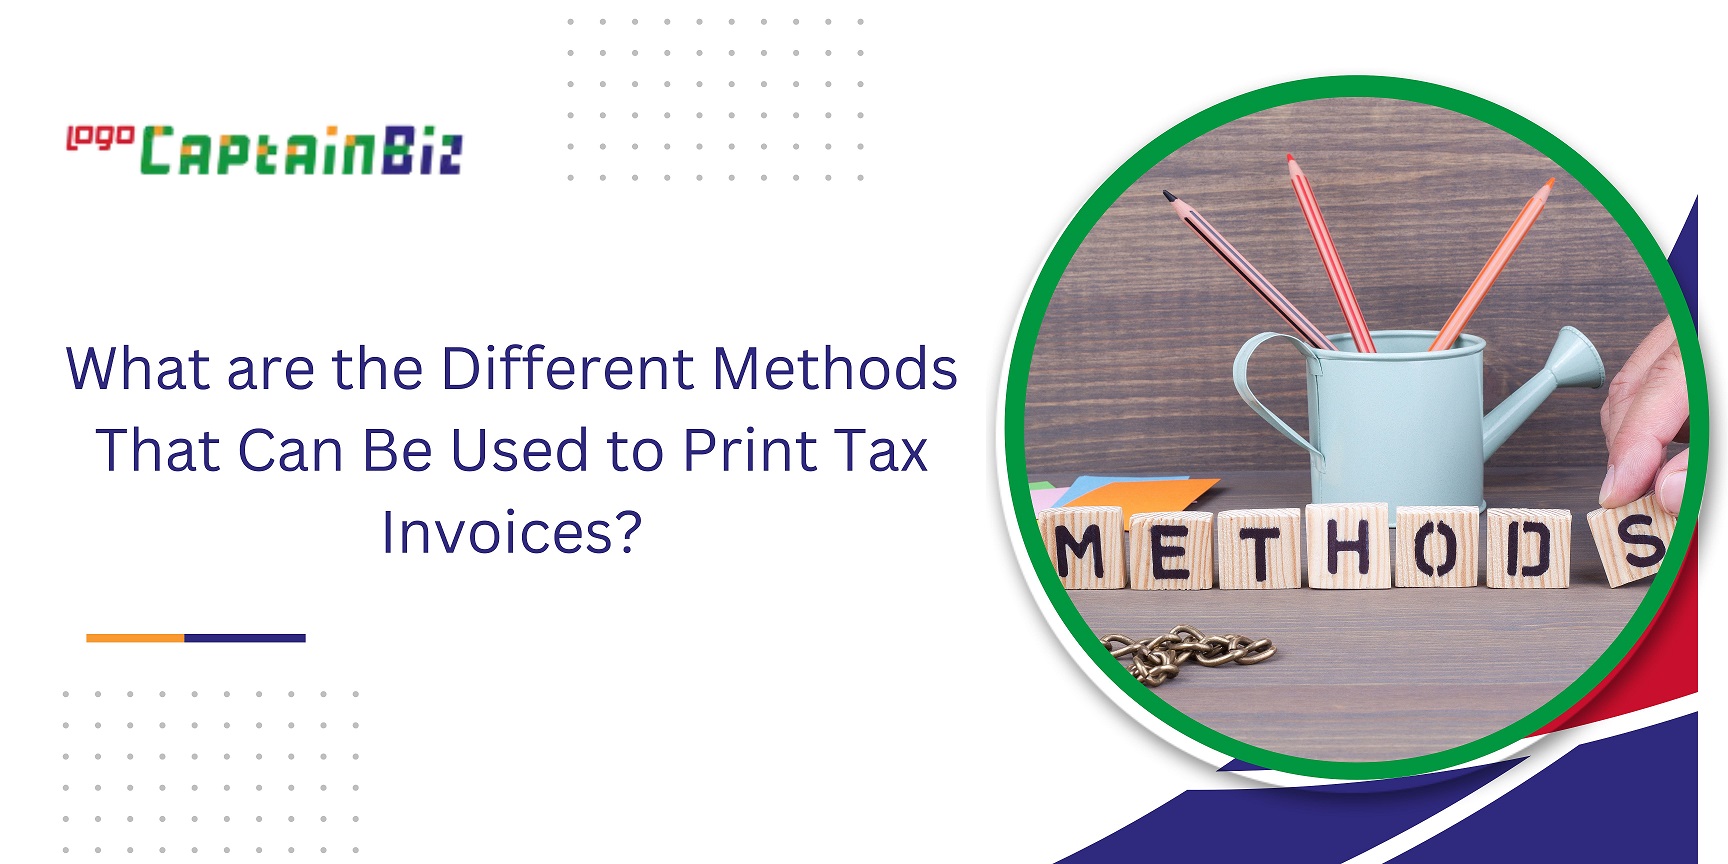 CaptainBiz: What are the Different Methods That Can Be Used to Print Tax Invoices